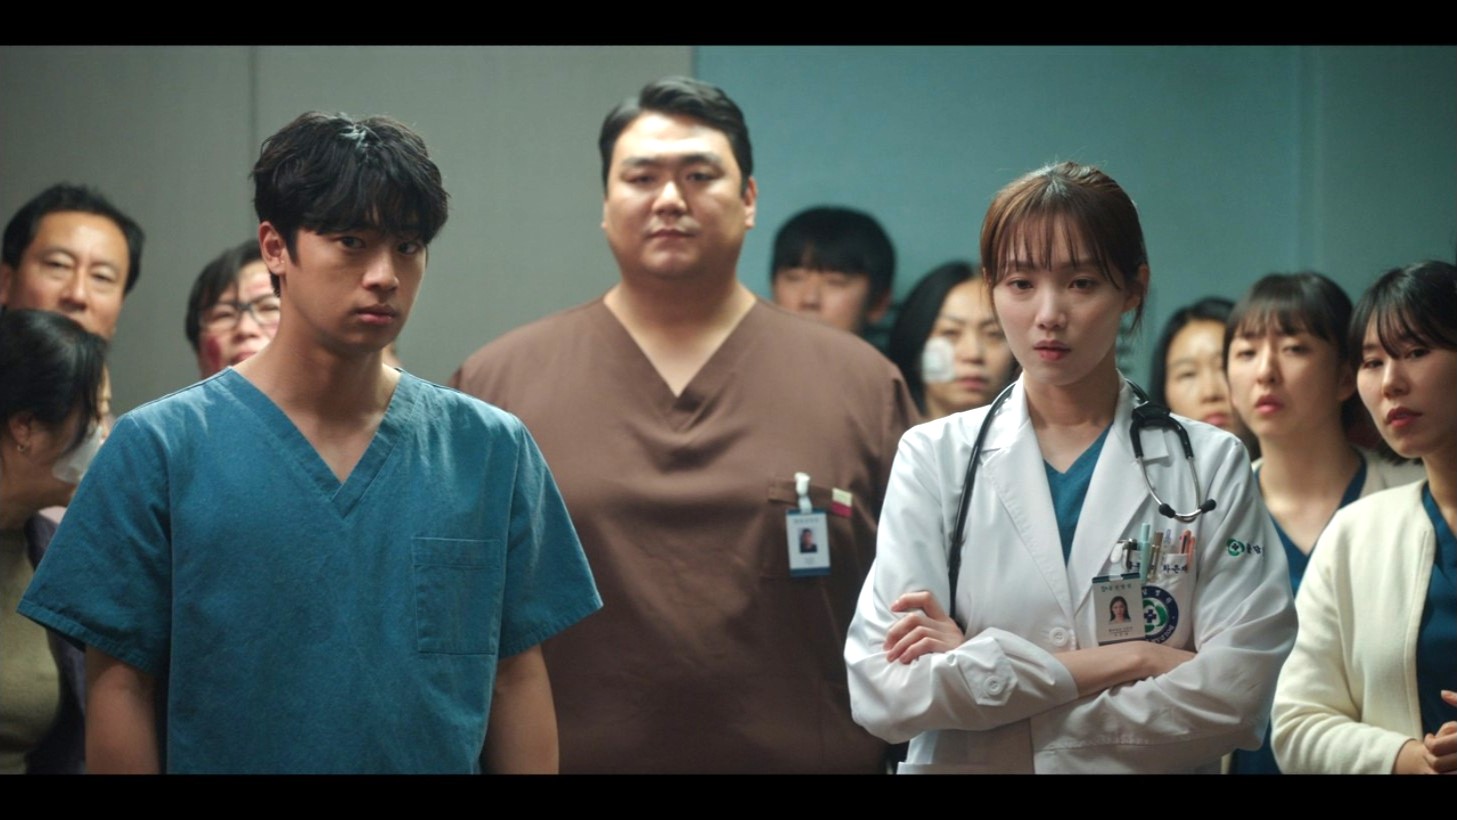 Lee Sung-kyung and Lee Shin-young in Romantic Doctor Teacher Kim 3: Episodes 3-4